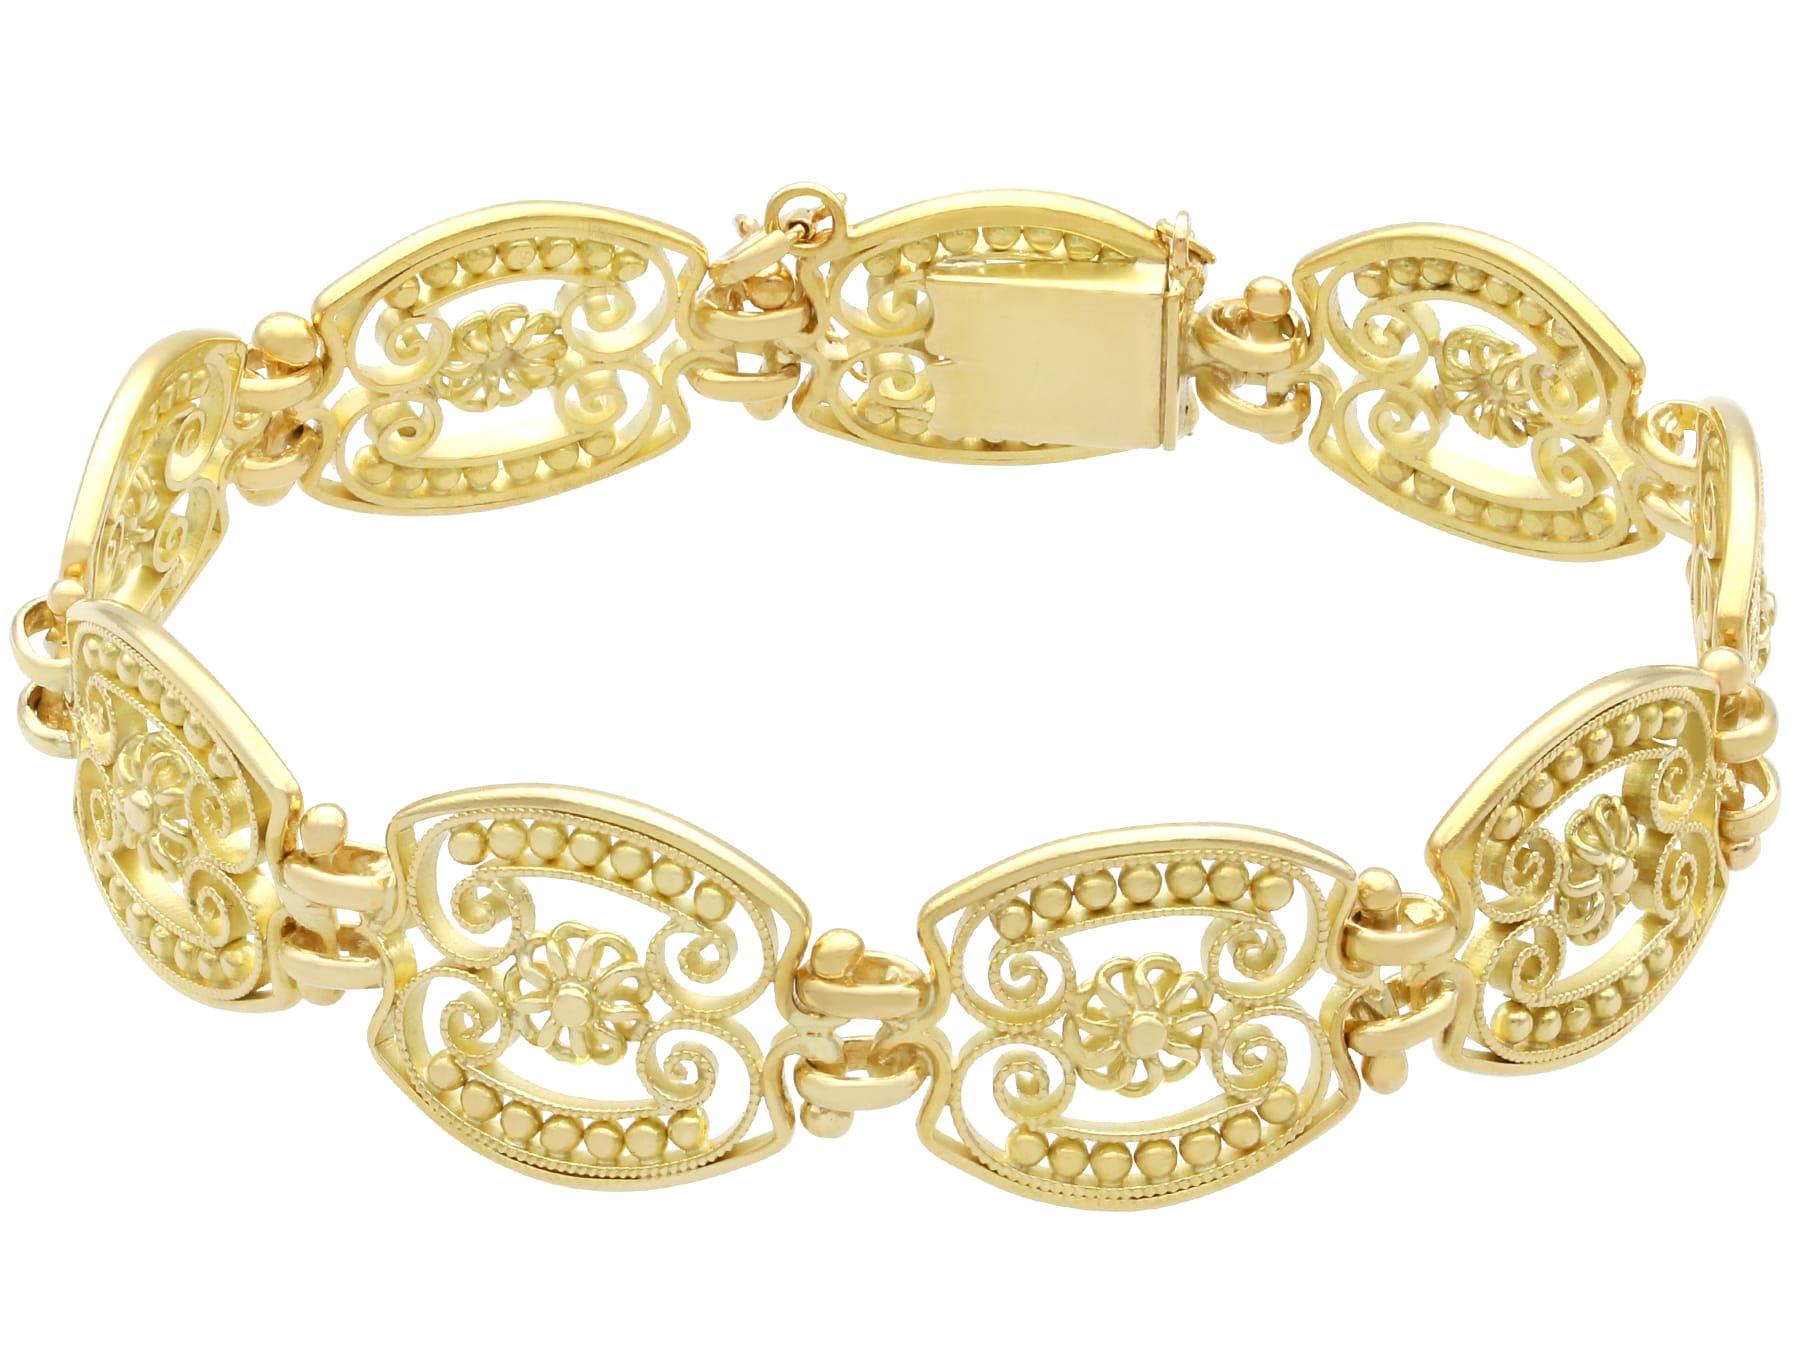 Antique French 18 Karat Yellow Gold Bracelet In Excellent Condition For Sale In Jesmond, Newcastle Upon Tyne